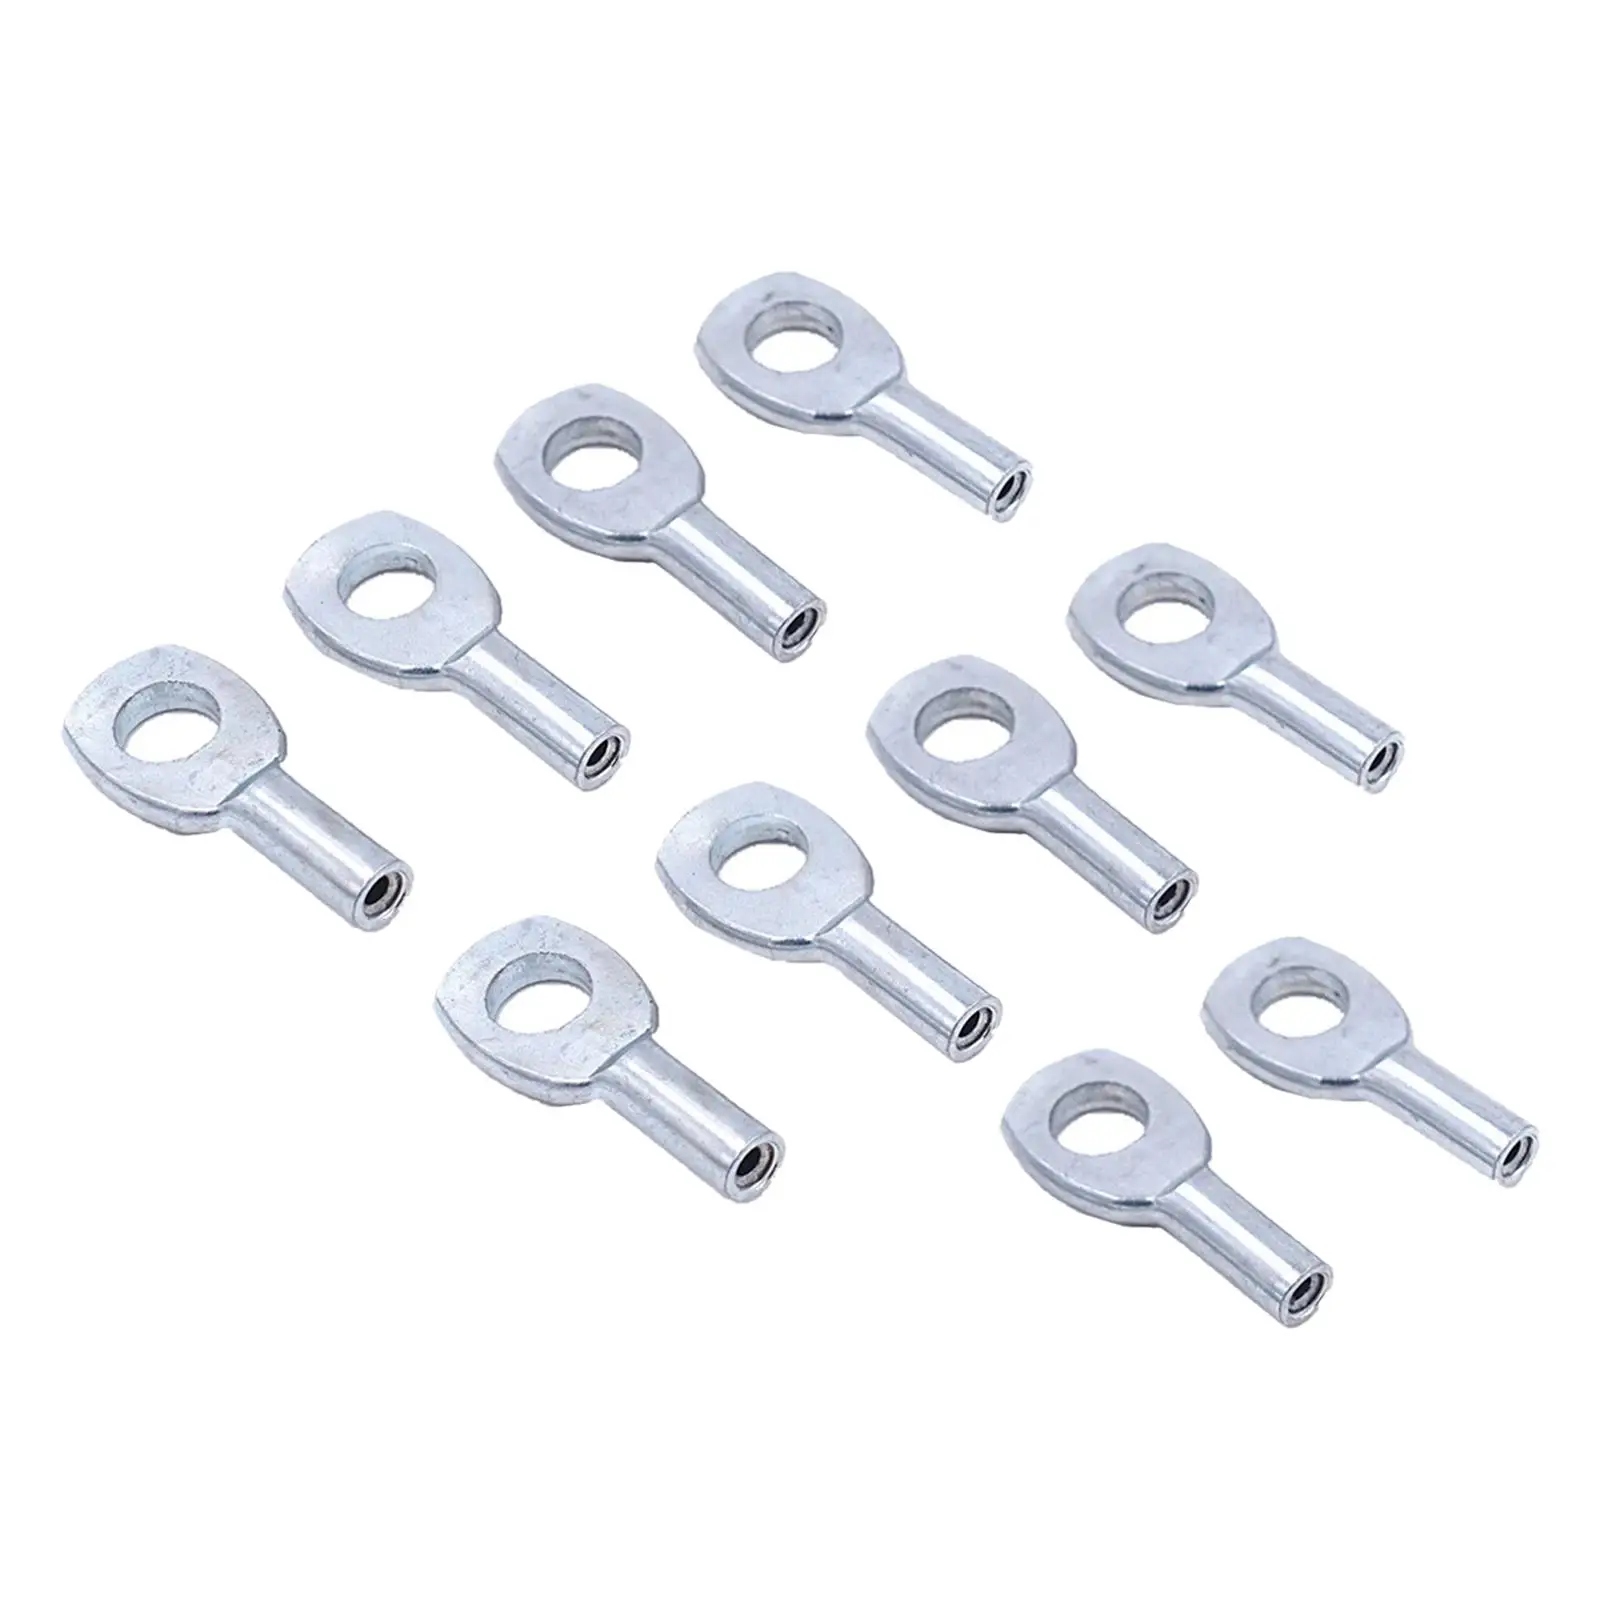 10 Pack Steel Wire Rope Eyelets Strength Training Exercise Machine Eyelet Terminal Connector Attachments for 2mm Wire Rope